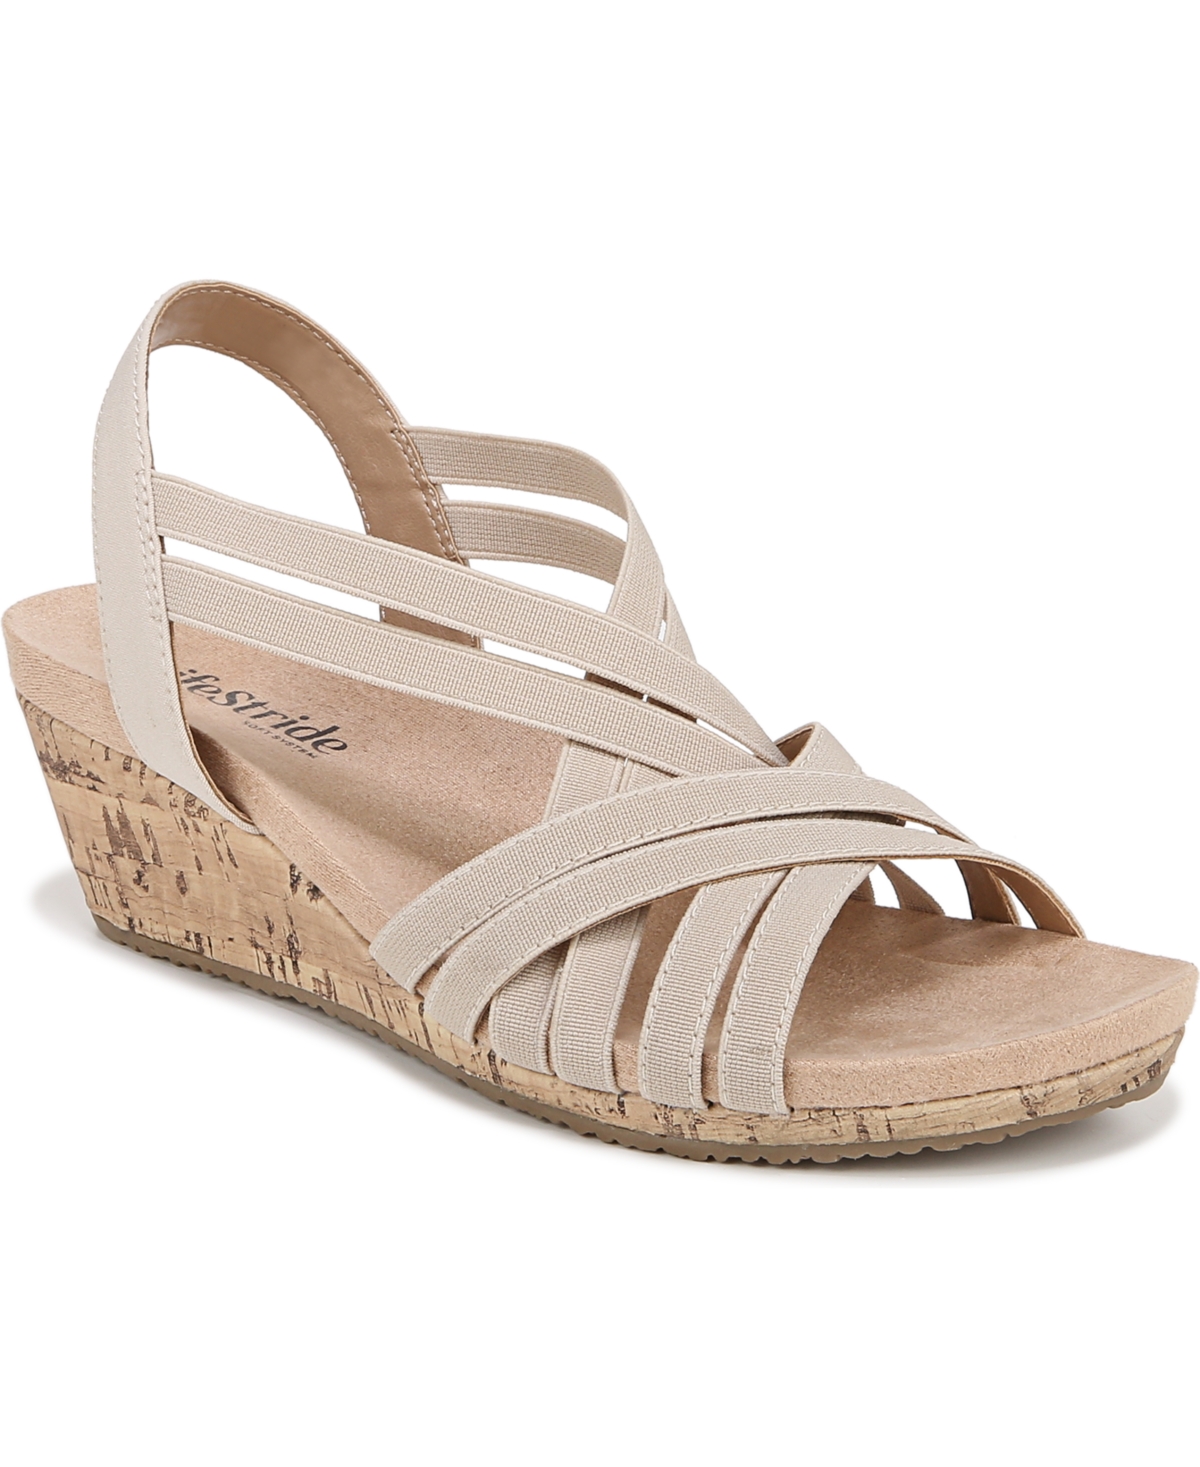 Lifestride Mallory Strappy Wedge Sandals In Almond Milk Fabric